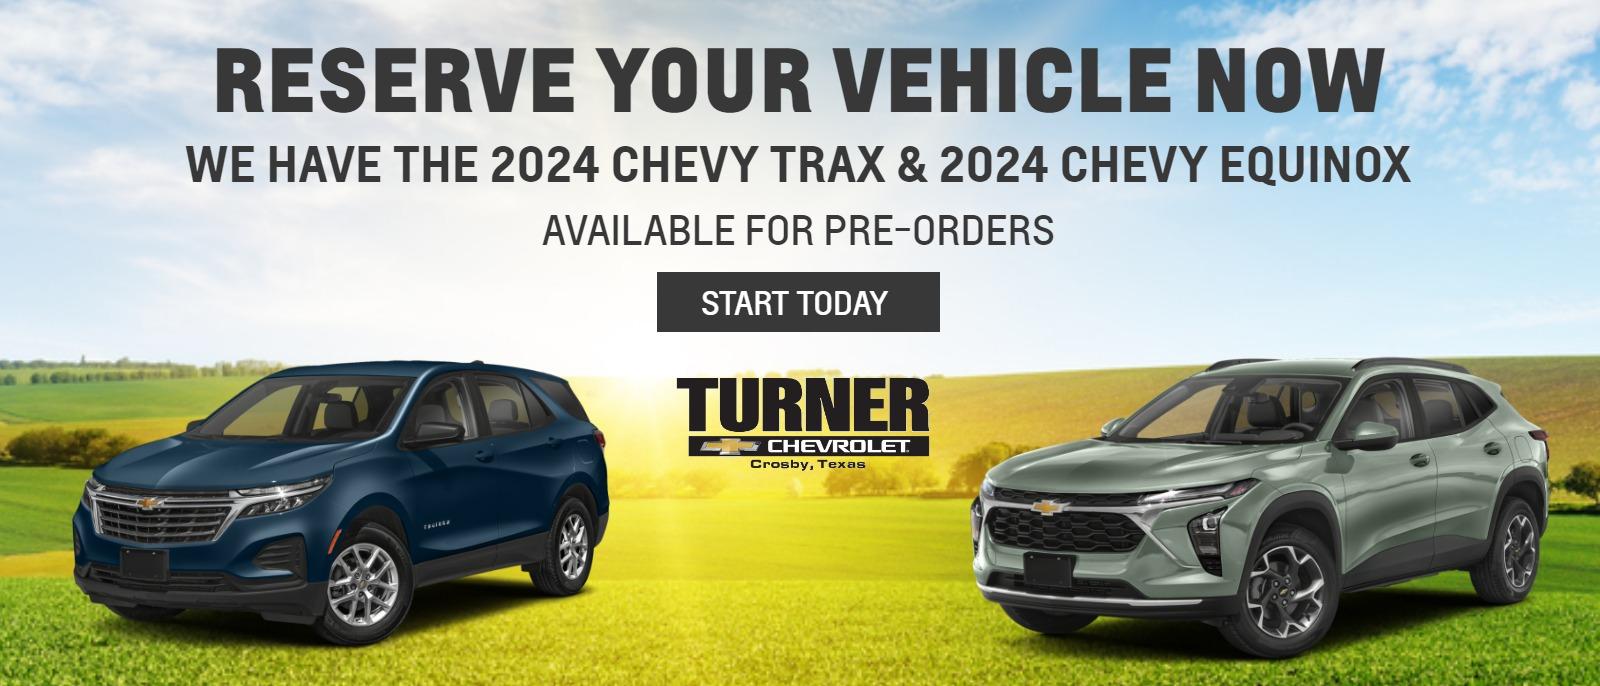 RESERVE YOUR VEHICLE NOW
We have the 2024 Chevy Trax & 2024 Chevy Equinox
available for pre-orders